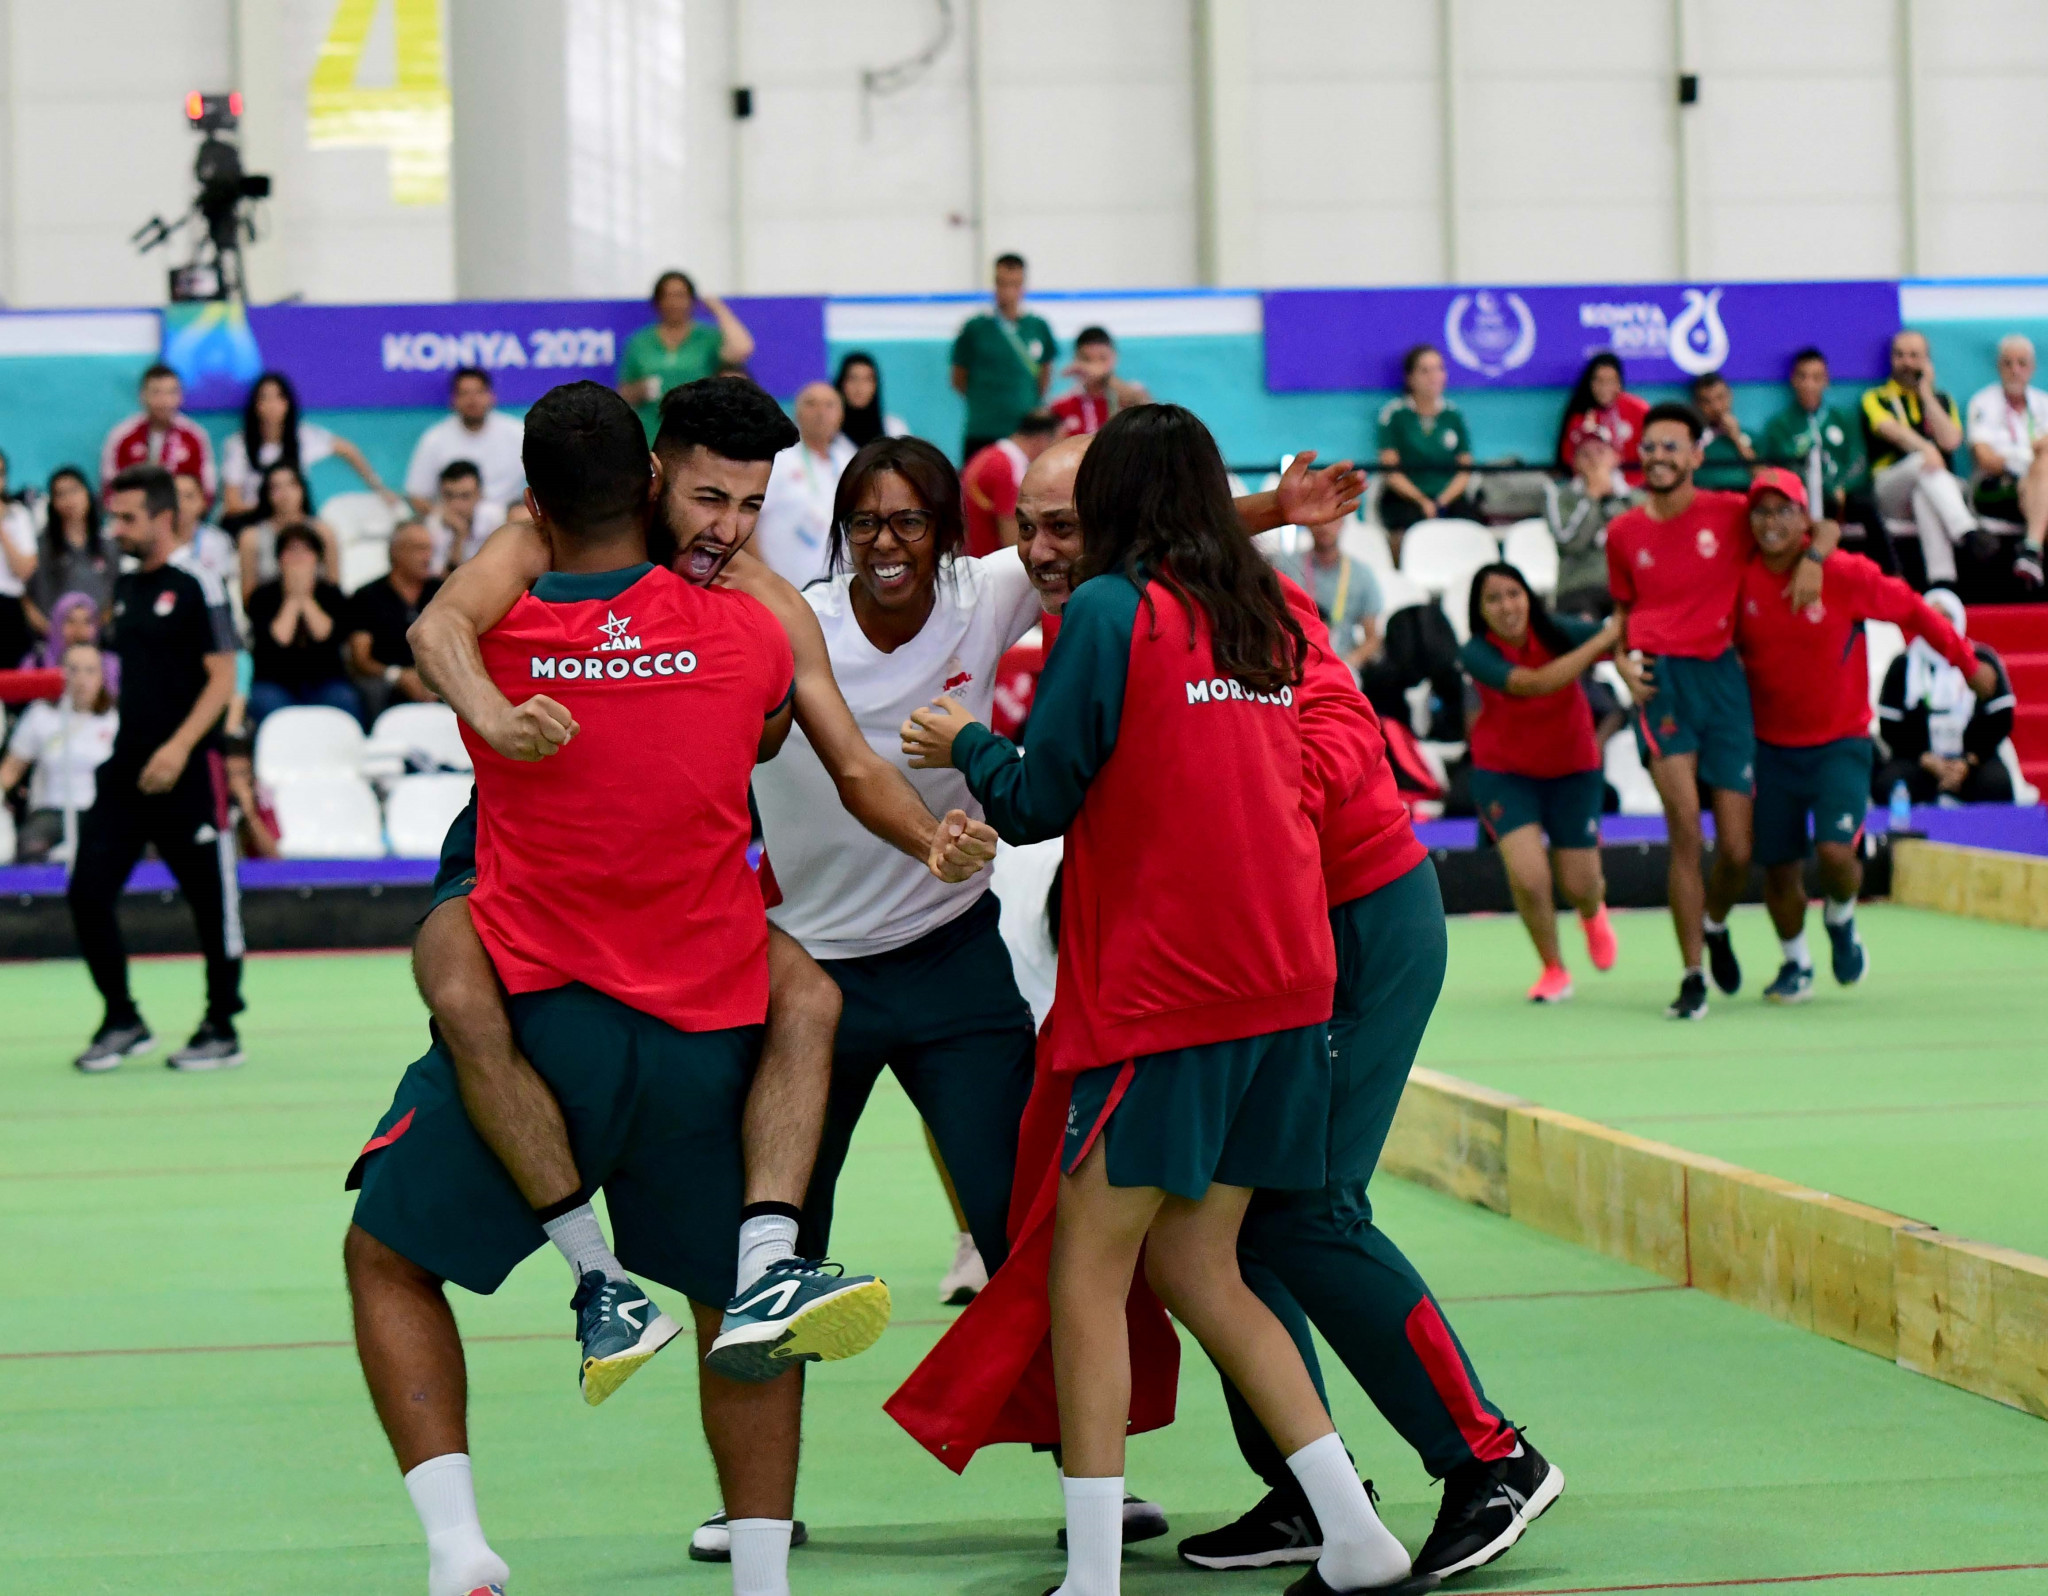 Morocco's bocce players celebrate wildly after winning men's raffa double gold ©Konya 2021